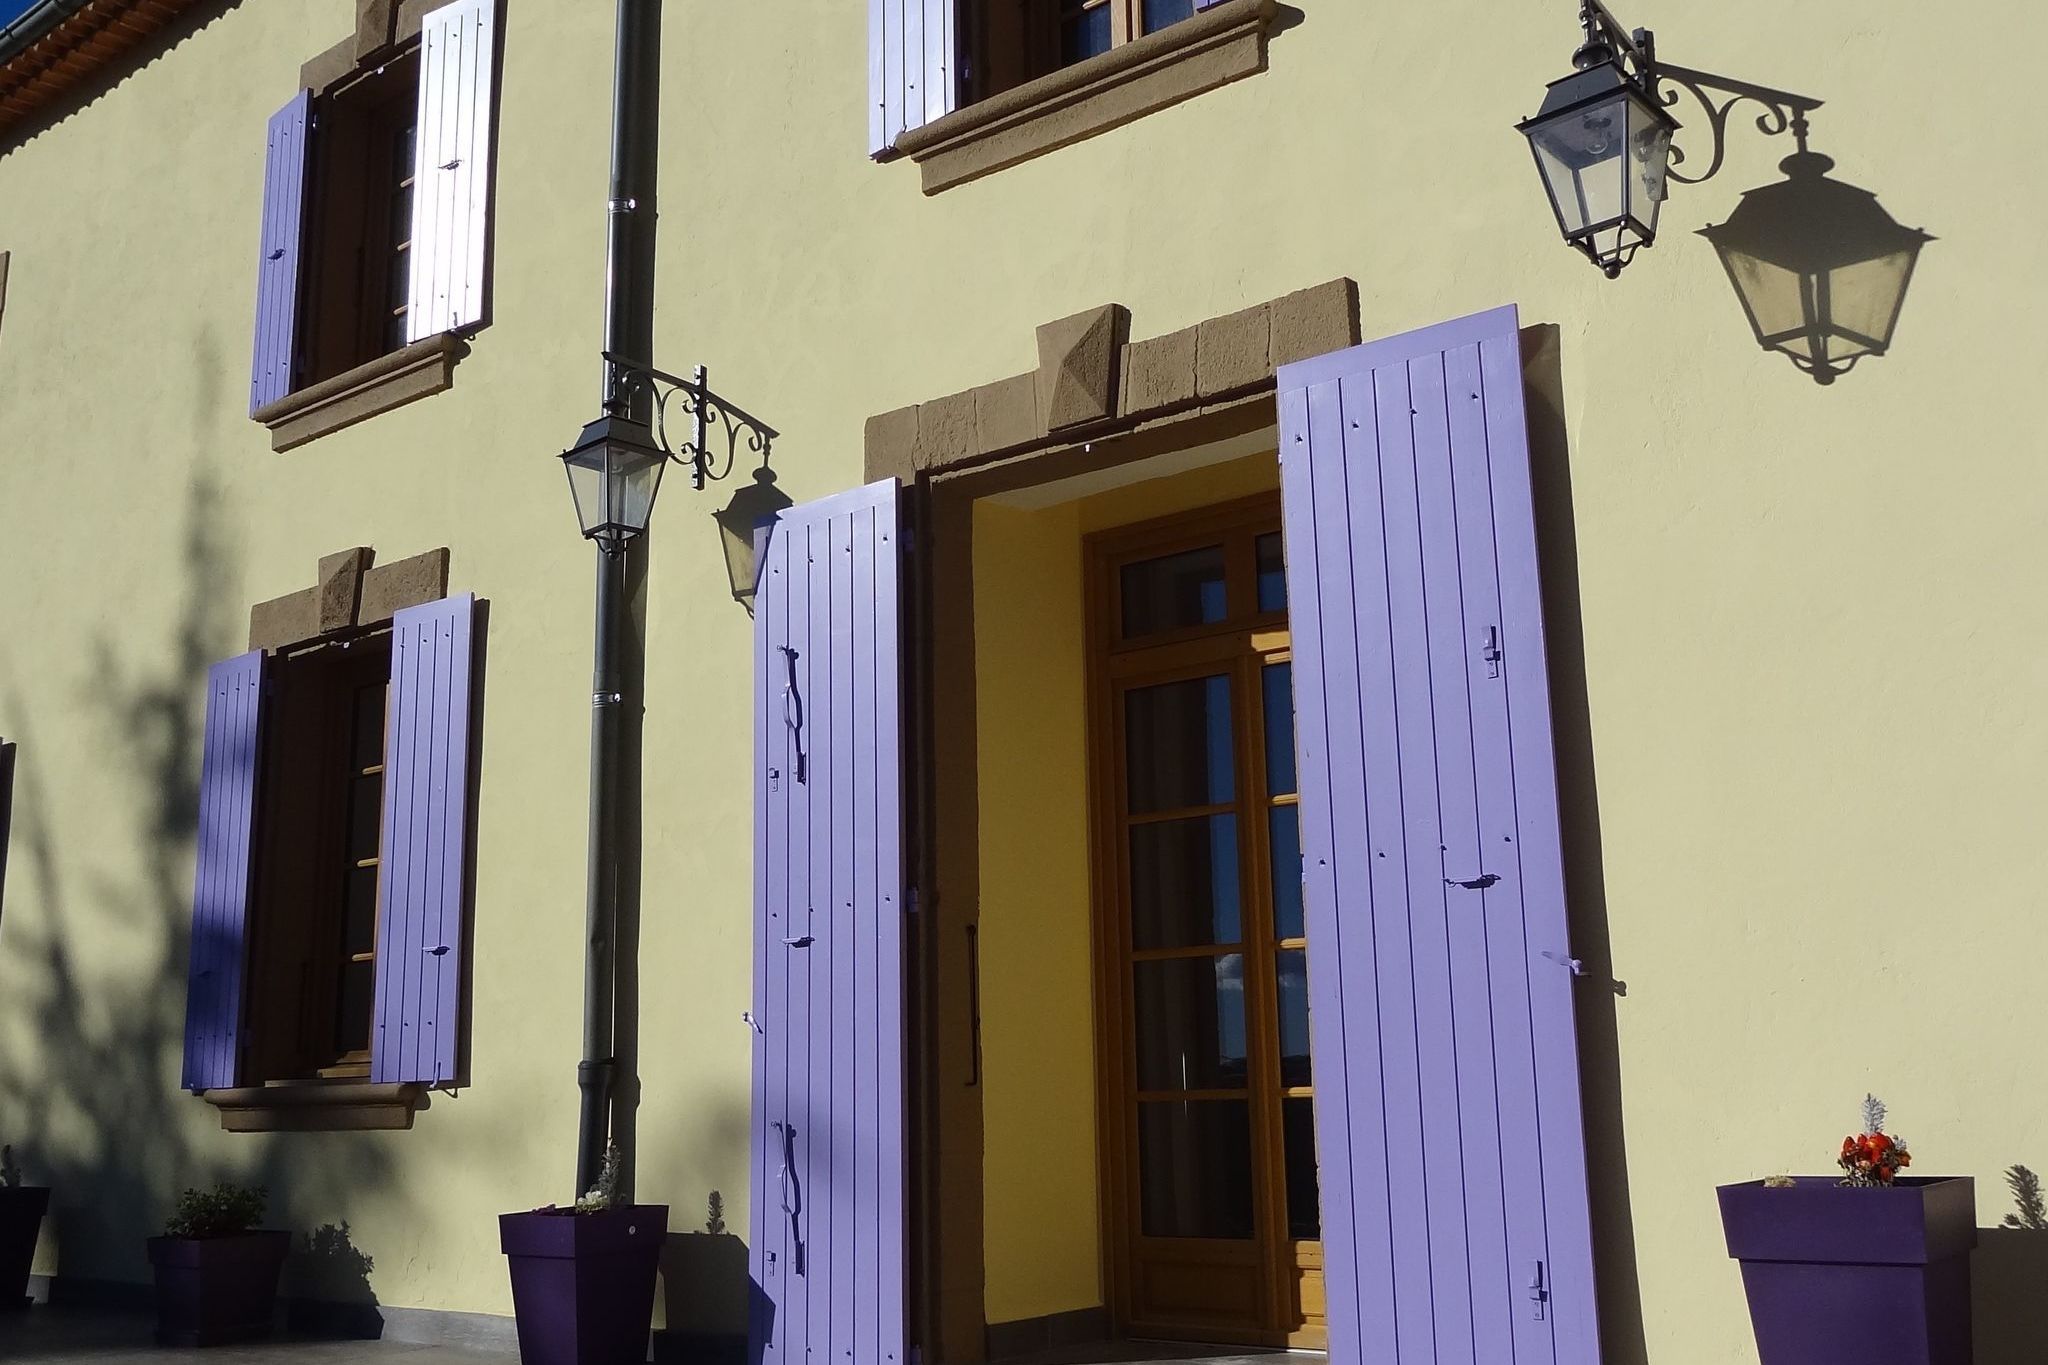 Nice apartment with dishwasher located among lavender fields